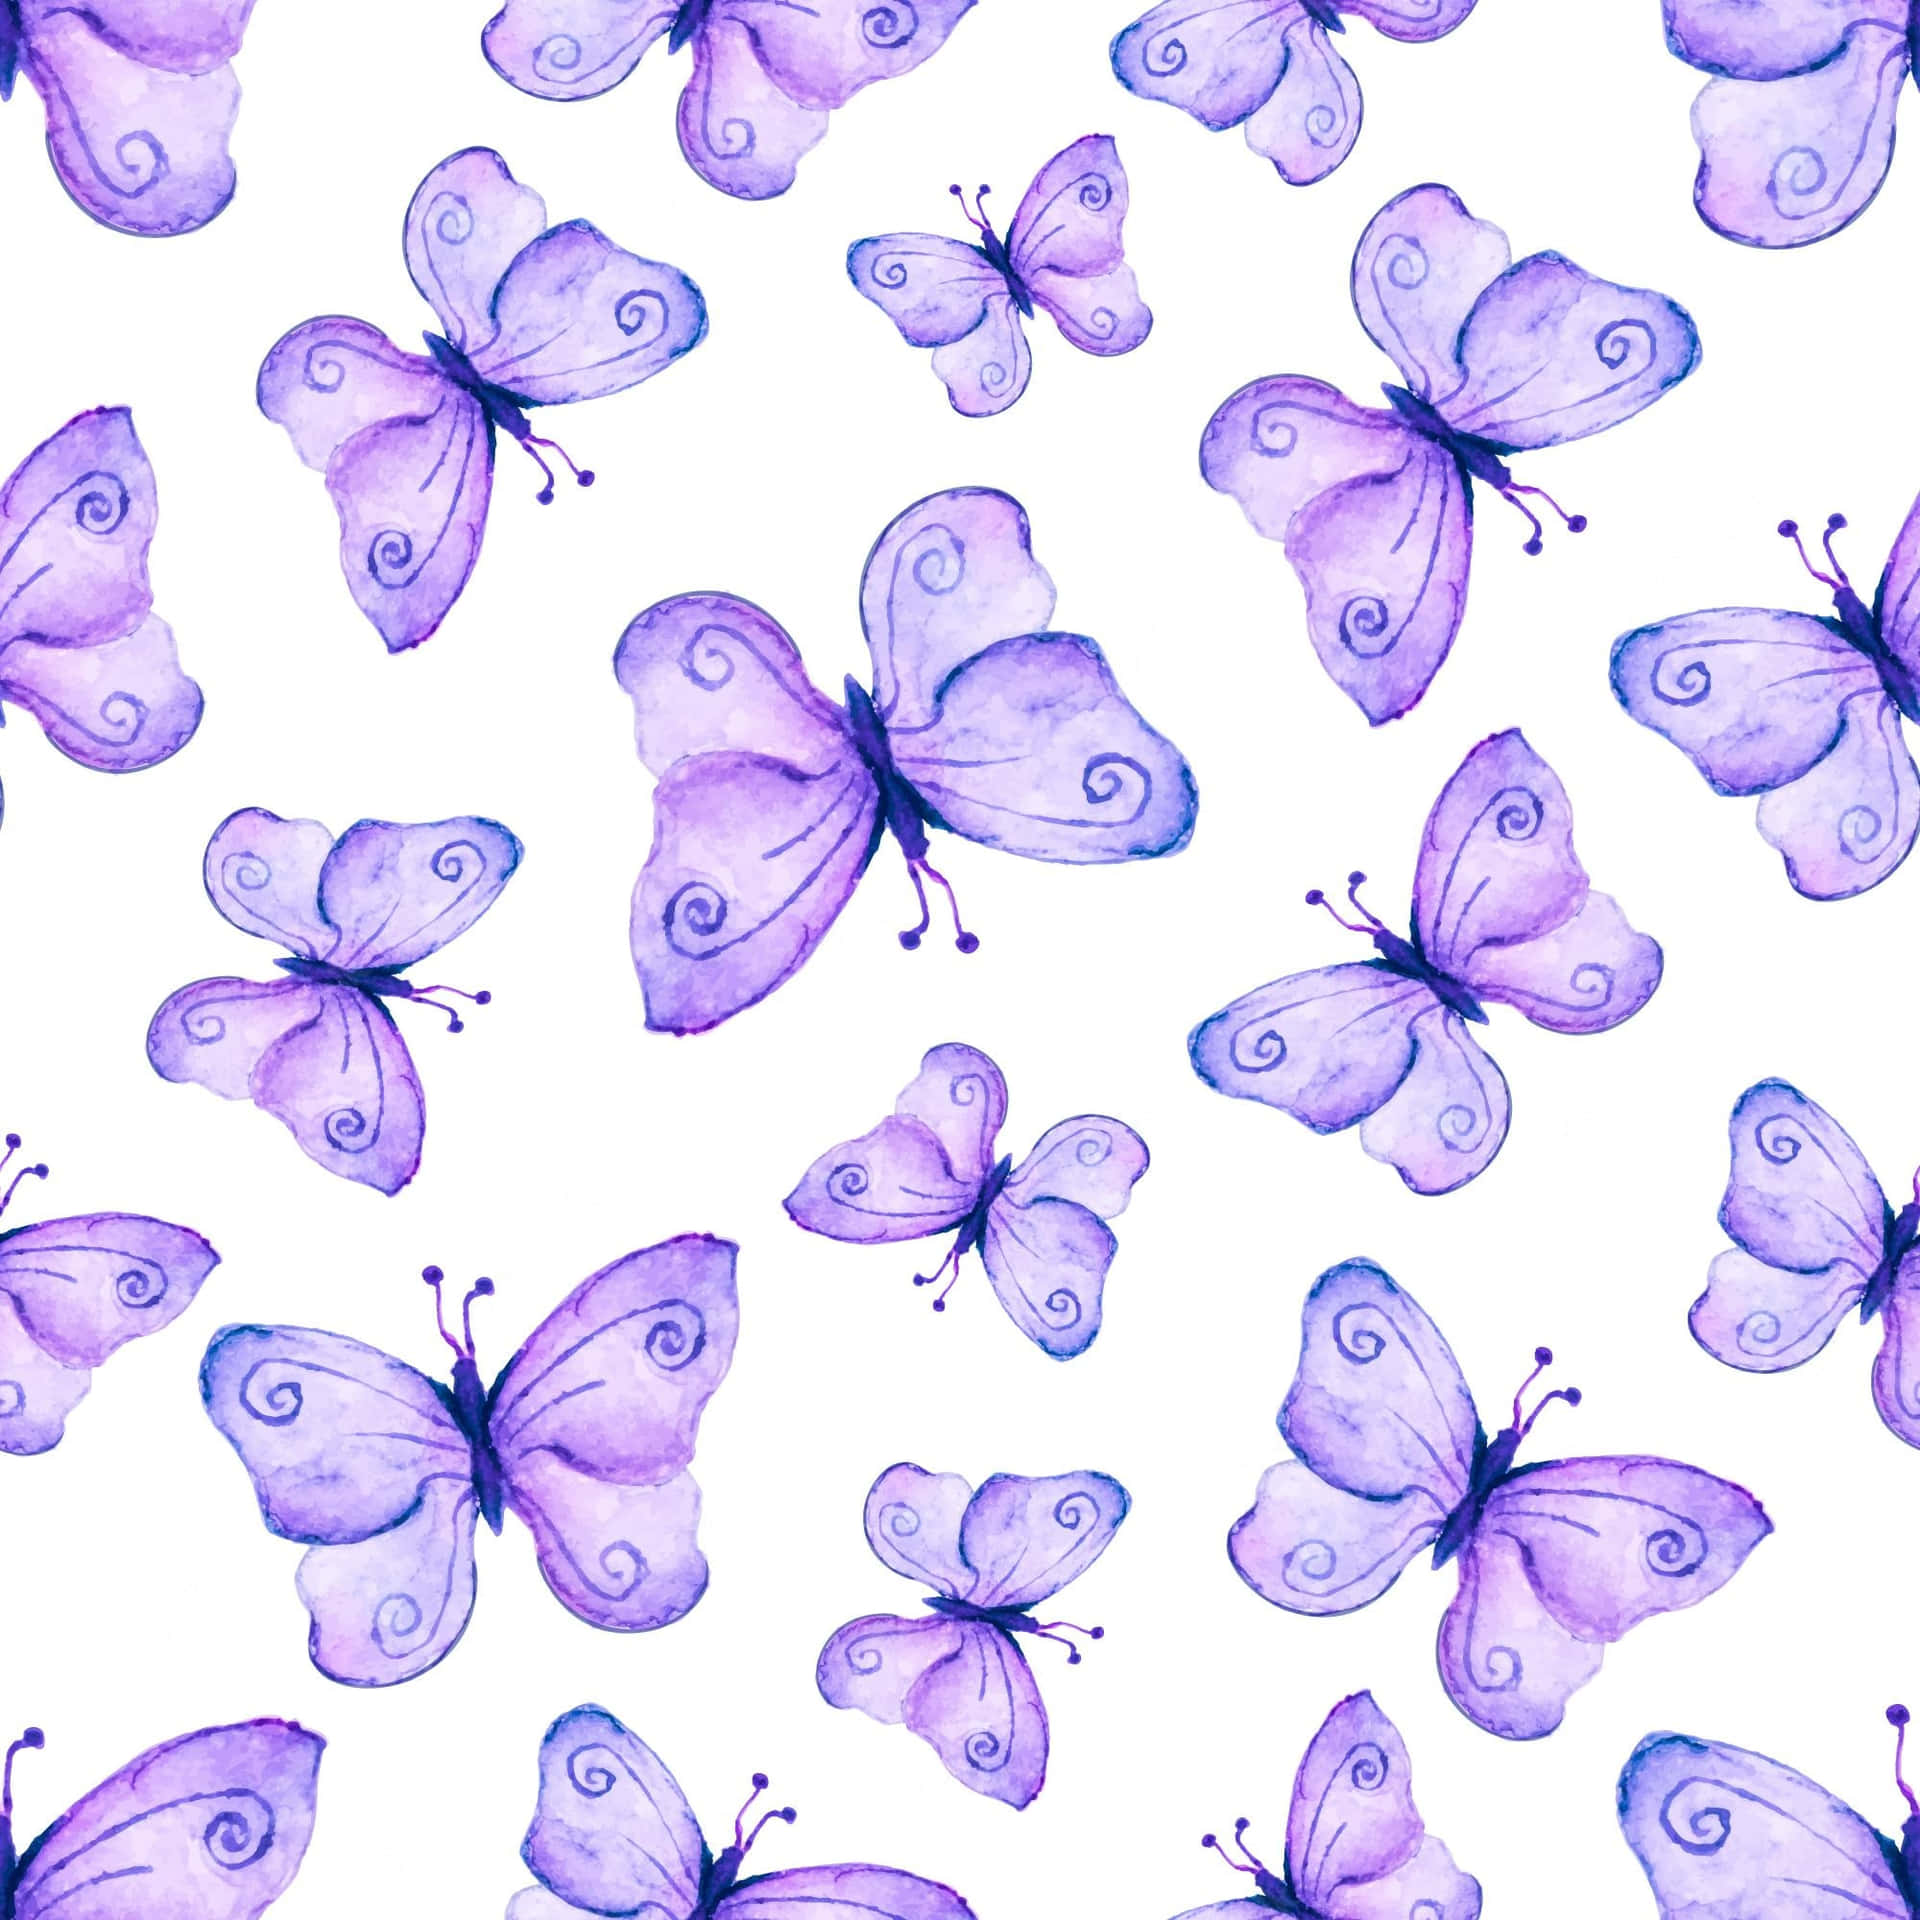 Download Exquisite Purple Butterfly On Floral Background | Wallpapers.com